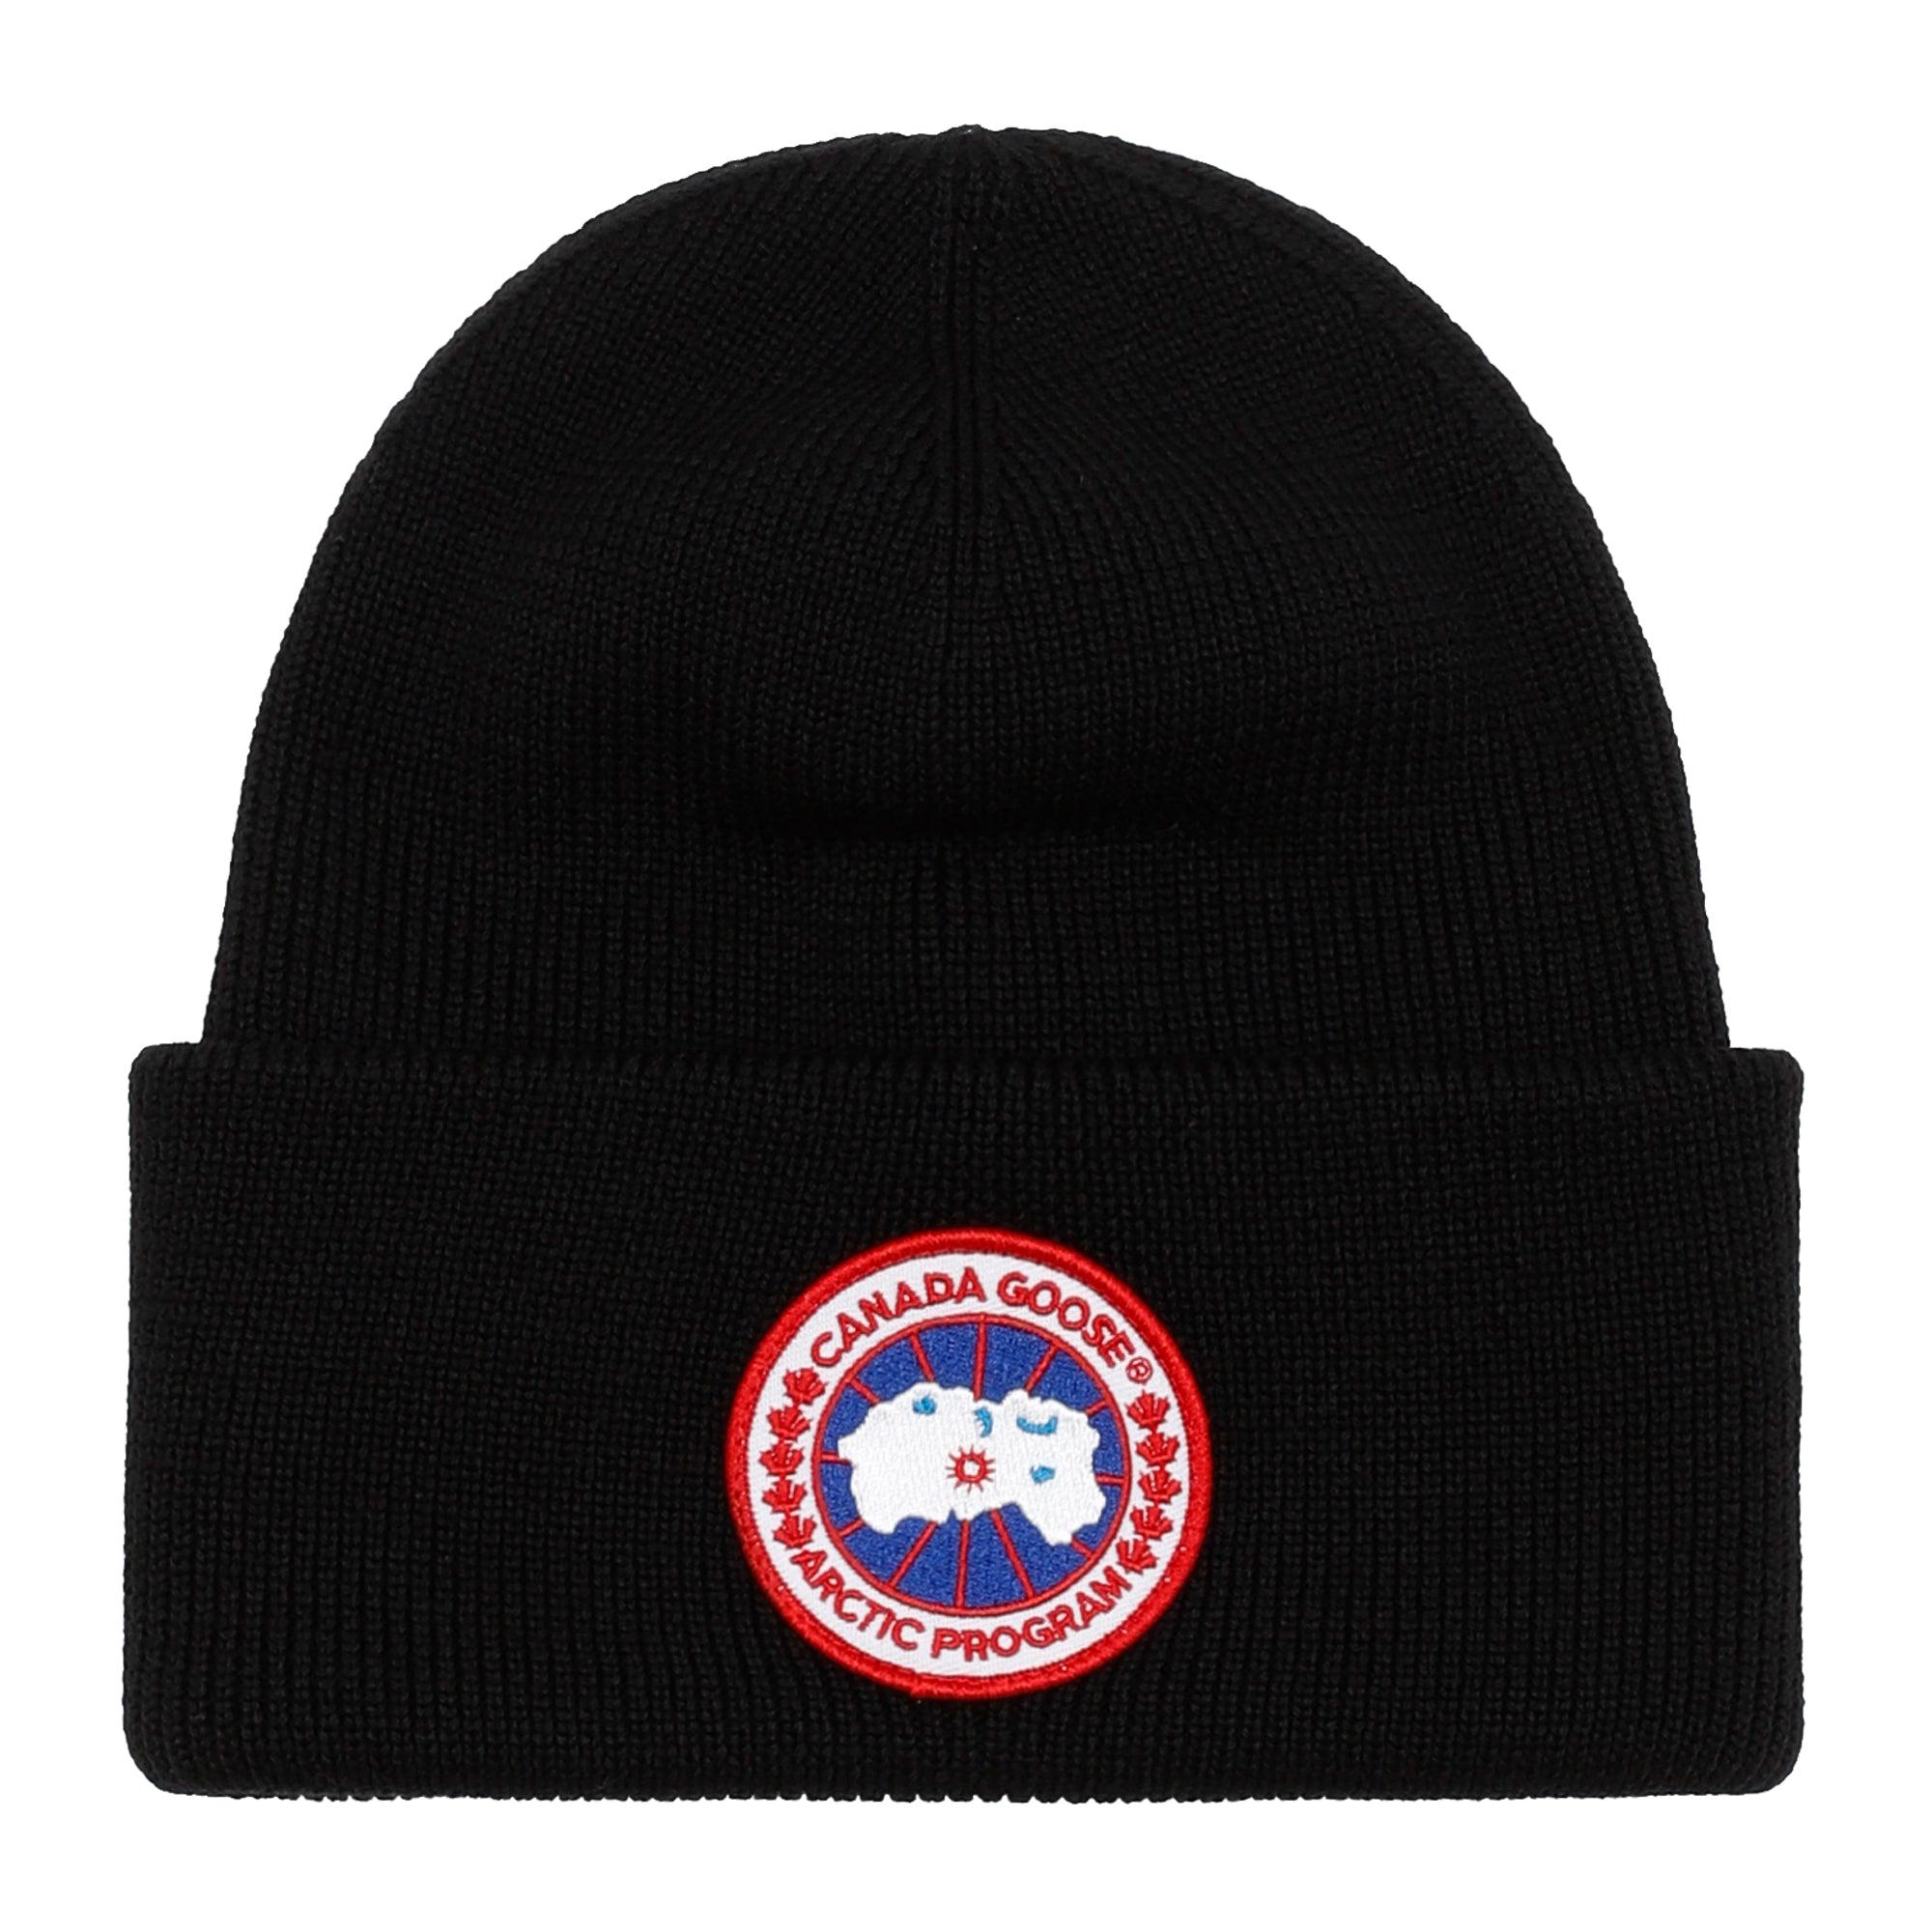 Save 2% Grey for Men Canada Goose Wool Artic Toque Beanie in Grey Mens Hats Canada Goose Hats 